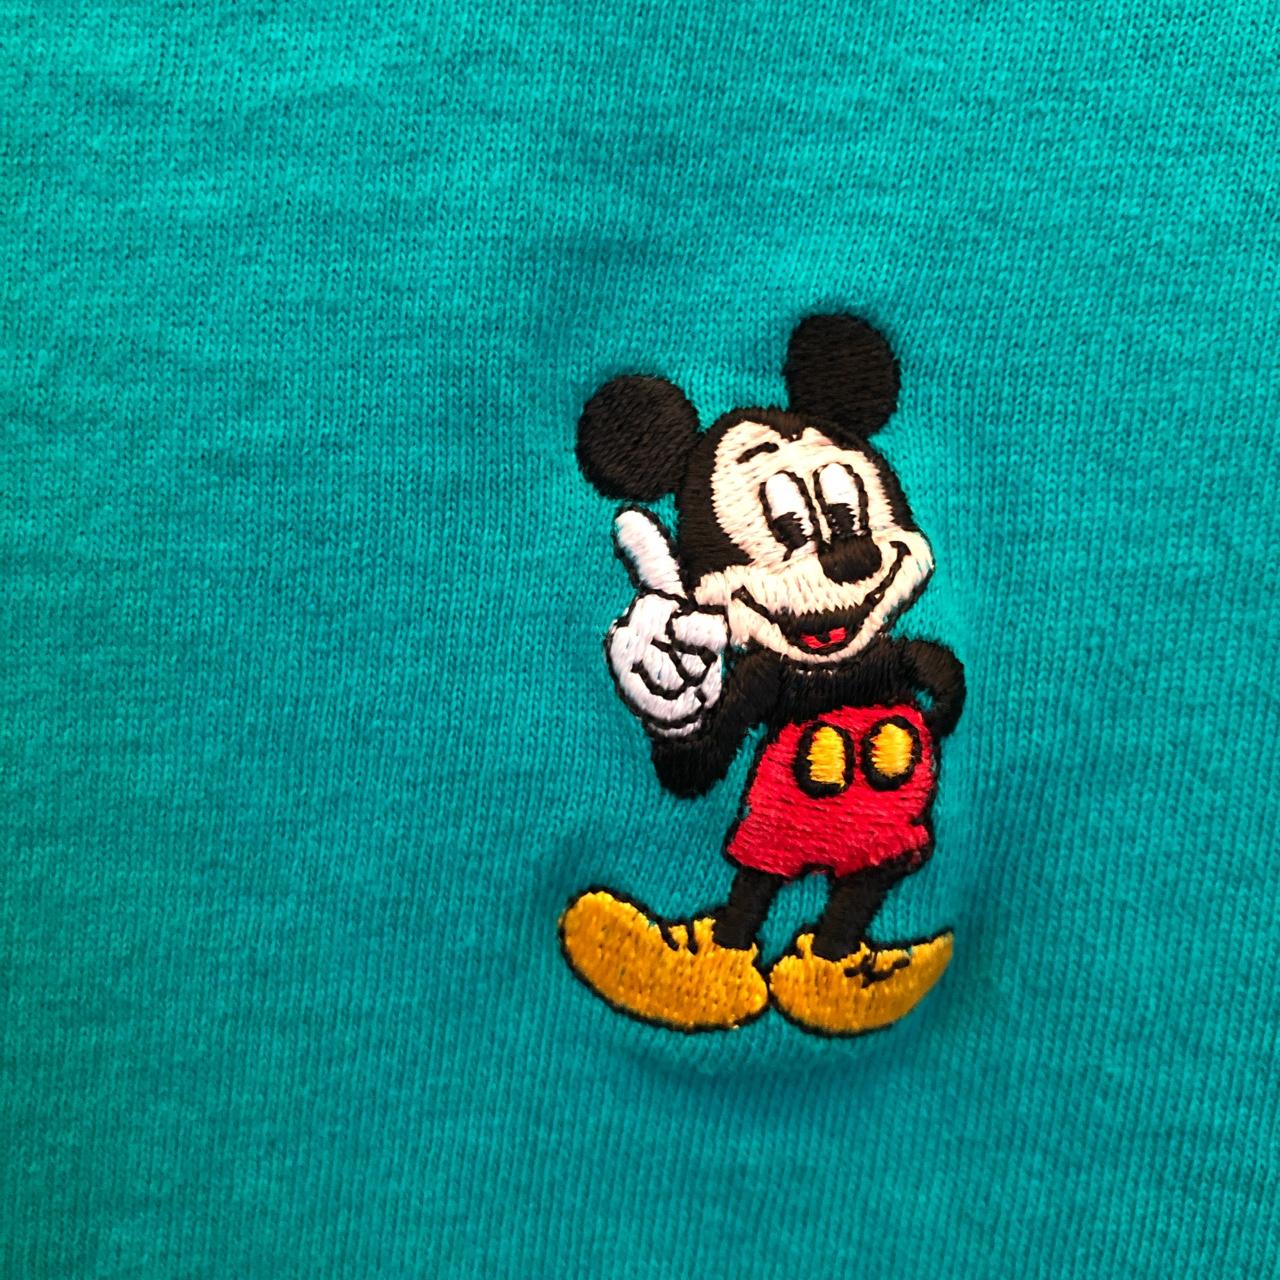 ‼️ DEPOP PAYMENTS ONLY! ‼️ Vintage Embroidered Mickey... - Depop